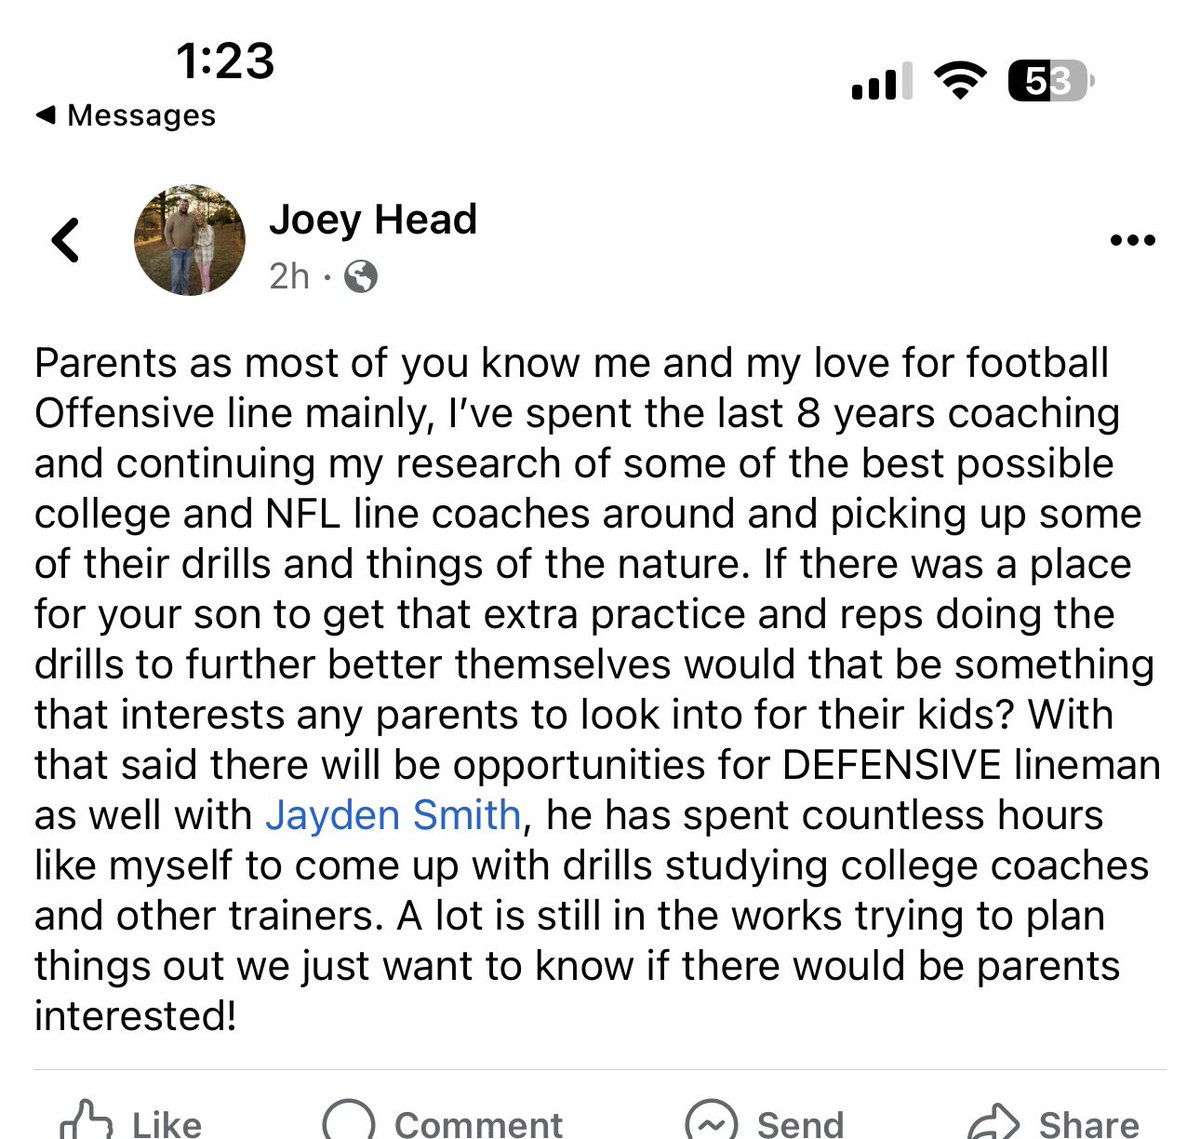 Any of my guys could share this and spread the word. This would be open to anyone trying to master their craft! #poundtherock